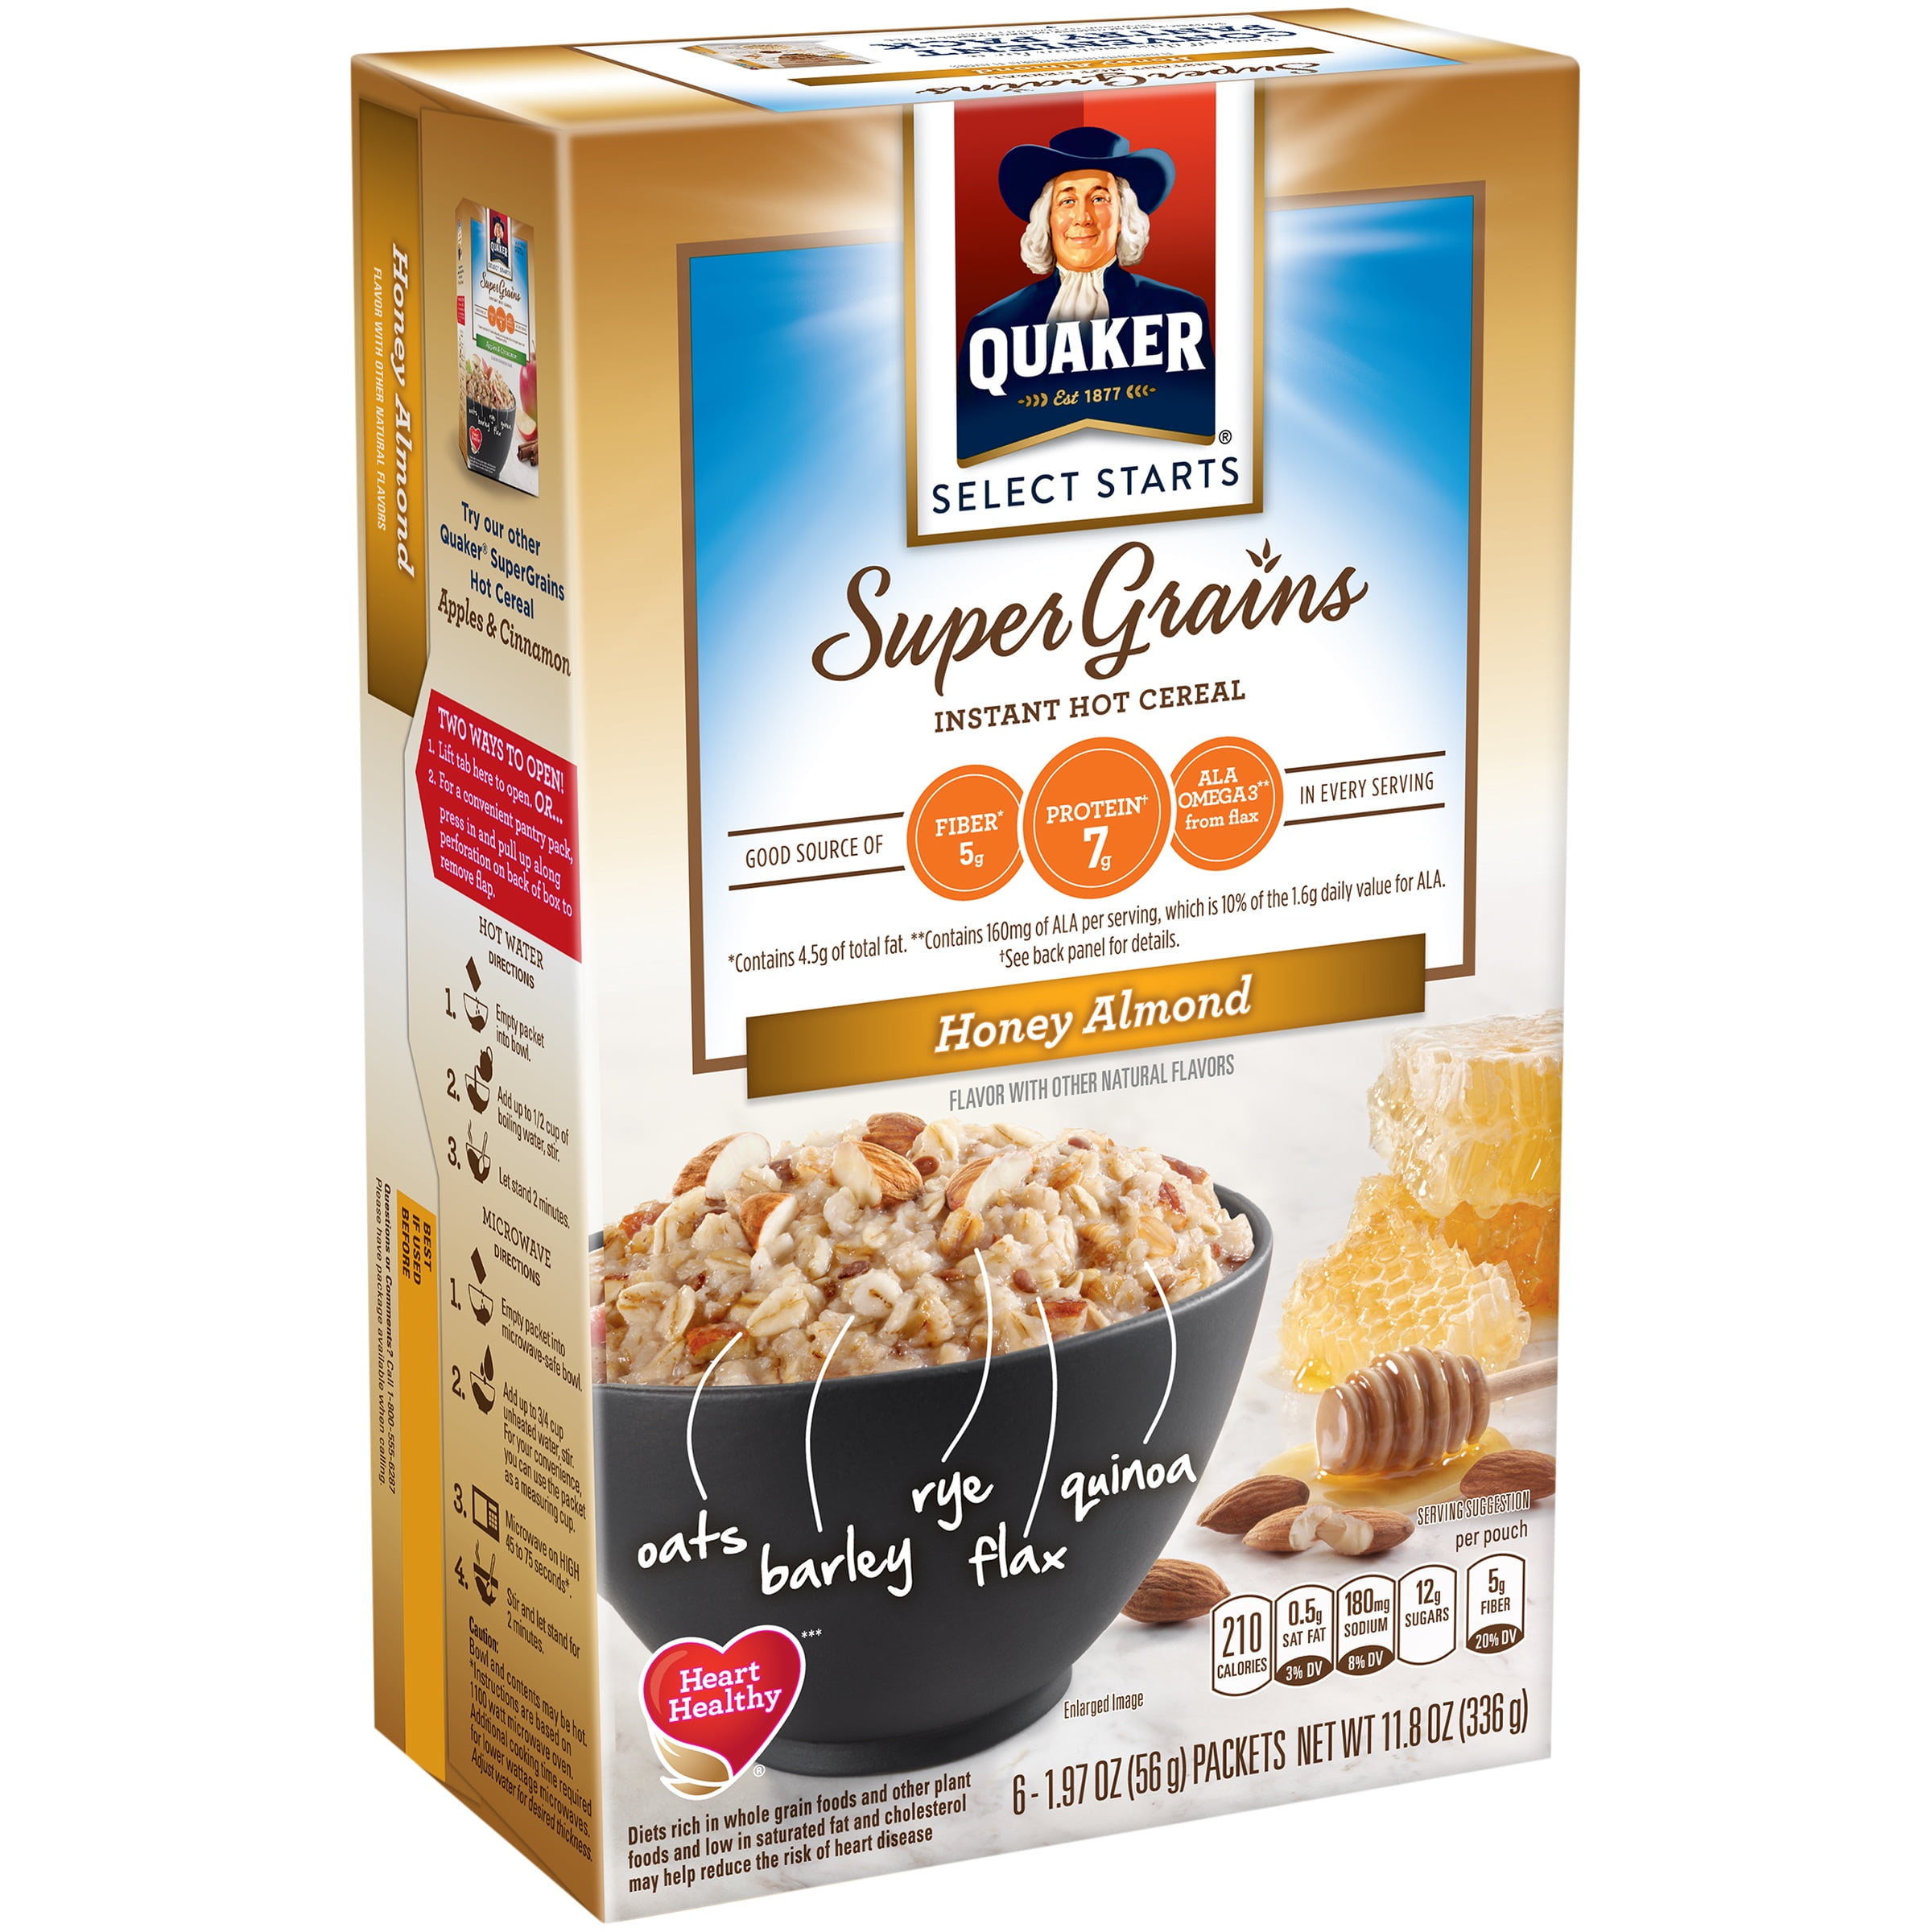 Quaker Super Grains Instant Hot Cereal, Honey Almond, 6 Packets